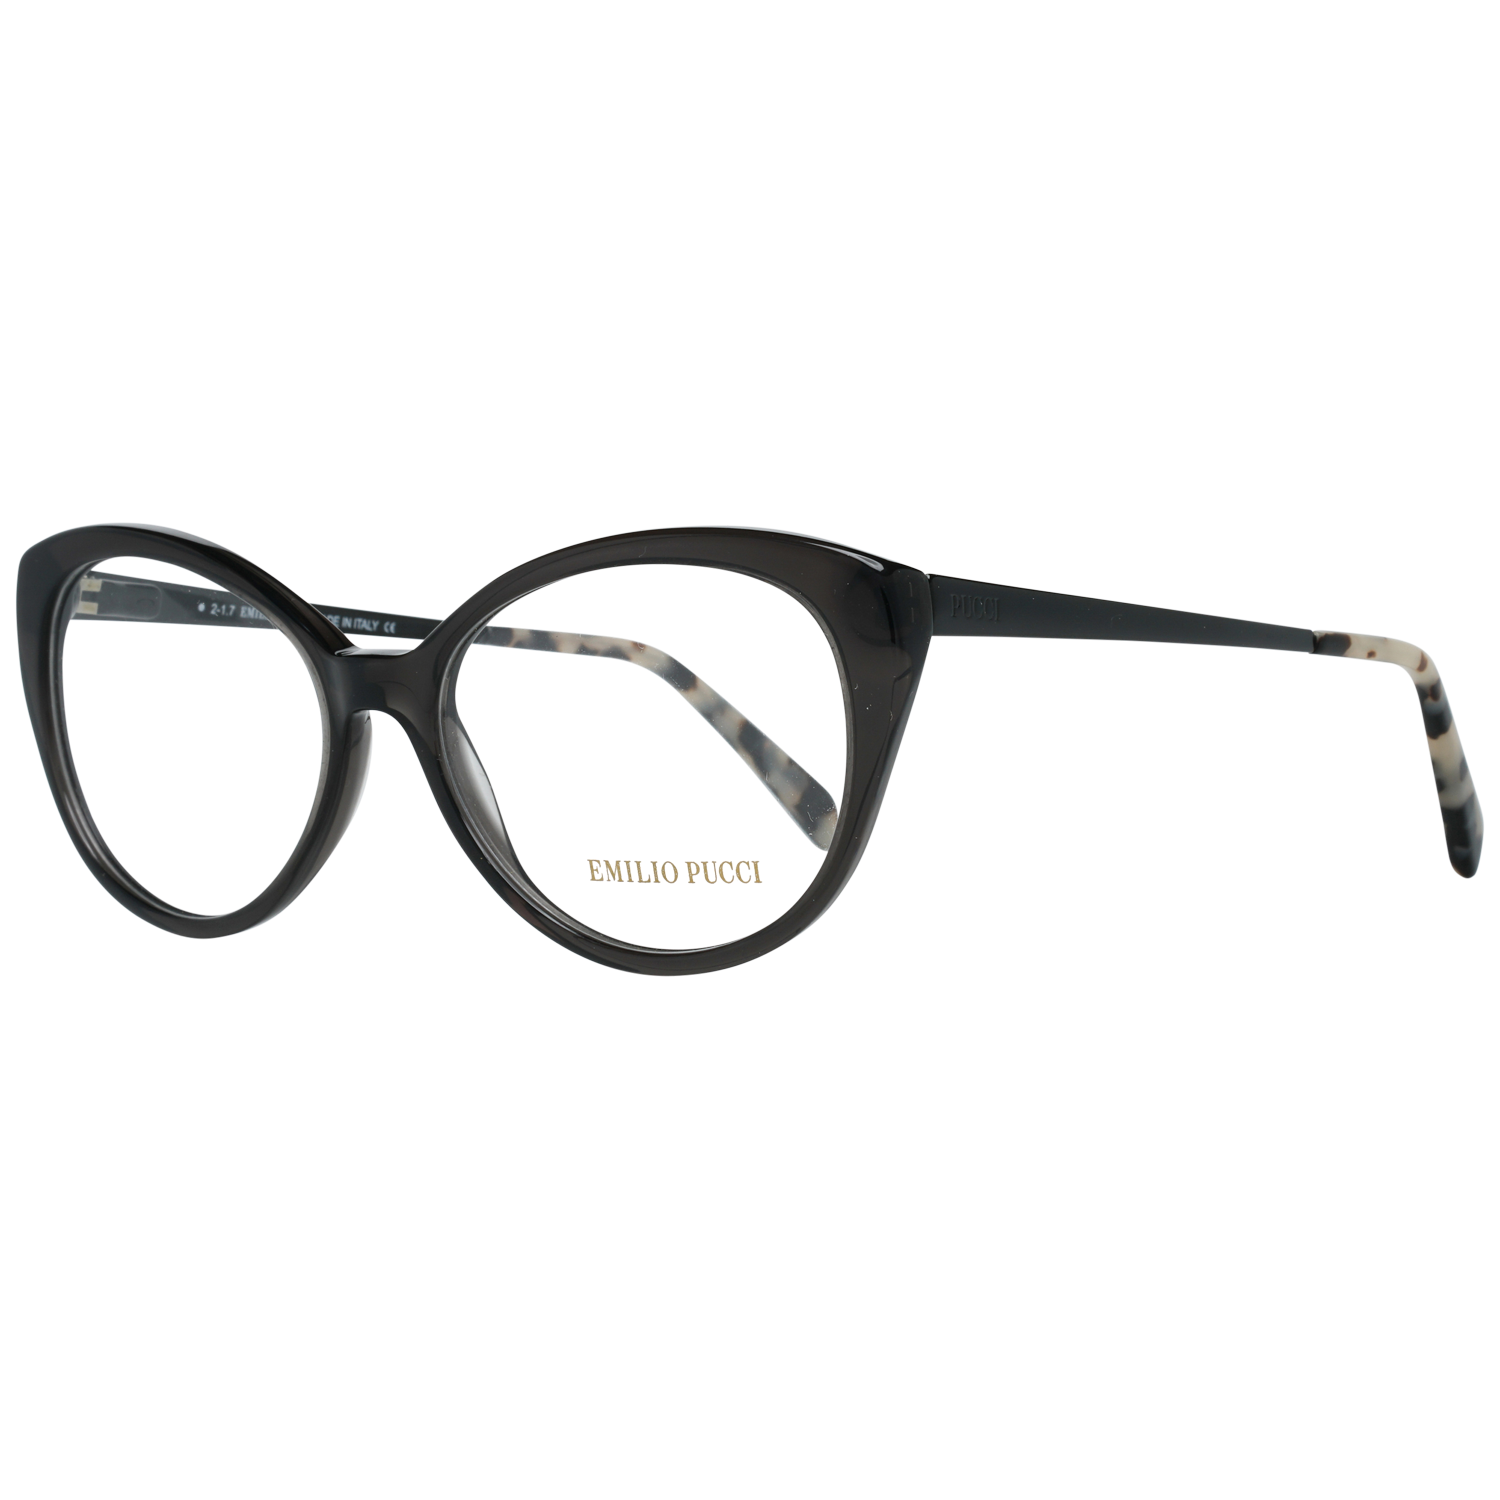 Emilio Pucci Optical Frame EP5063 005 53
Frame color: Black
Lenses width: 53
Lenses heigth: 41
Bridge length: 16
Frame width: 133
Temple length: 140
Shipment includes: Case, Cleaning cloth
Style: Full-Rim
Spring hinge: Yes